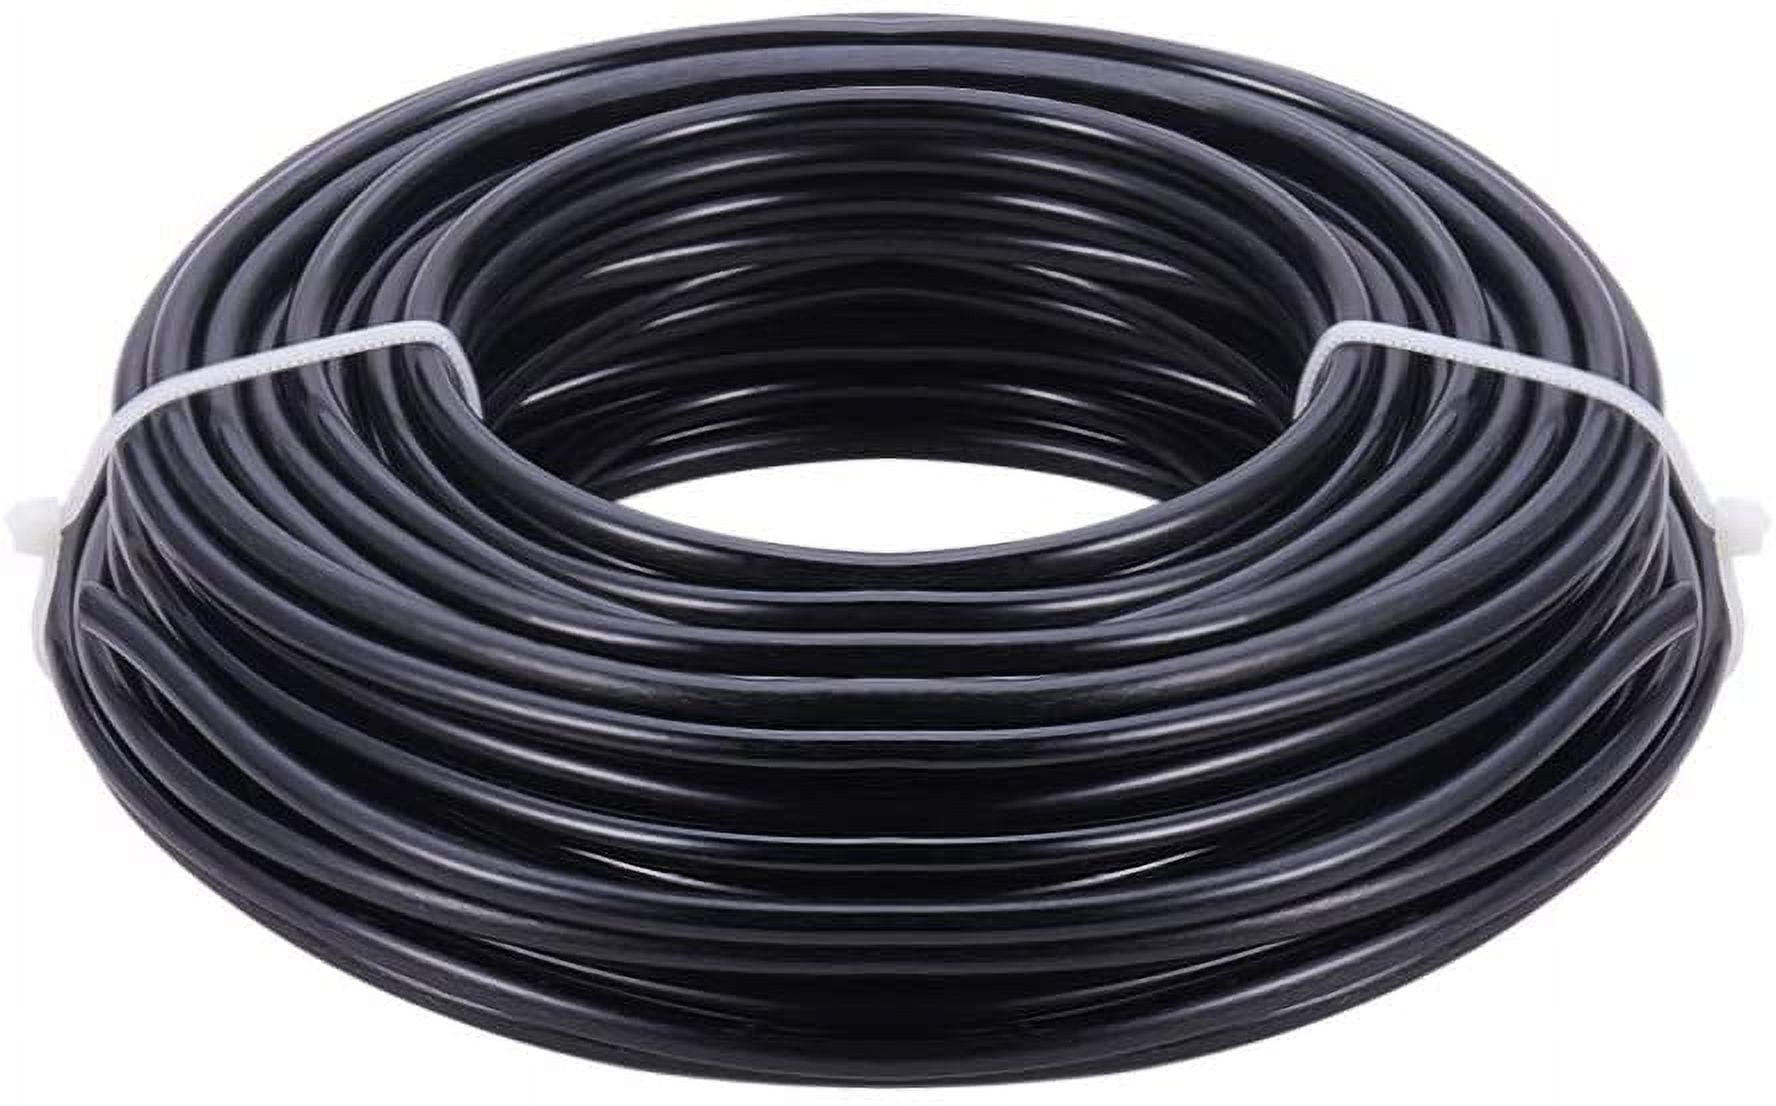 52 Feet 6 Gauge Aluminum Wire Bendable Metal Sculpting Wire for Bonsai  Trees Floral Skeleton Making Home Decors and Other Arts Crafts Making -  Black 